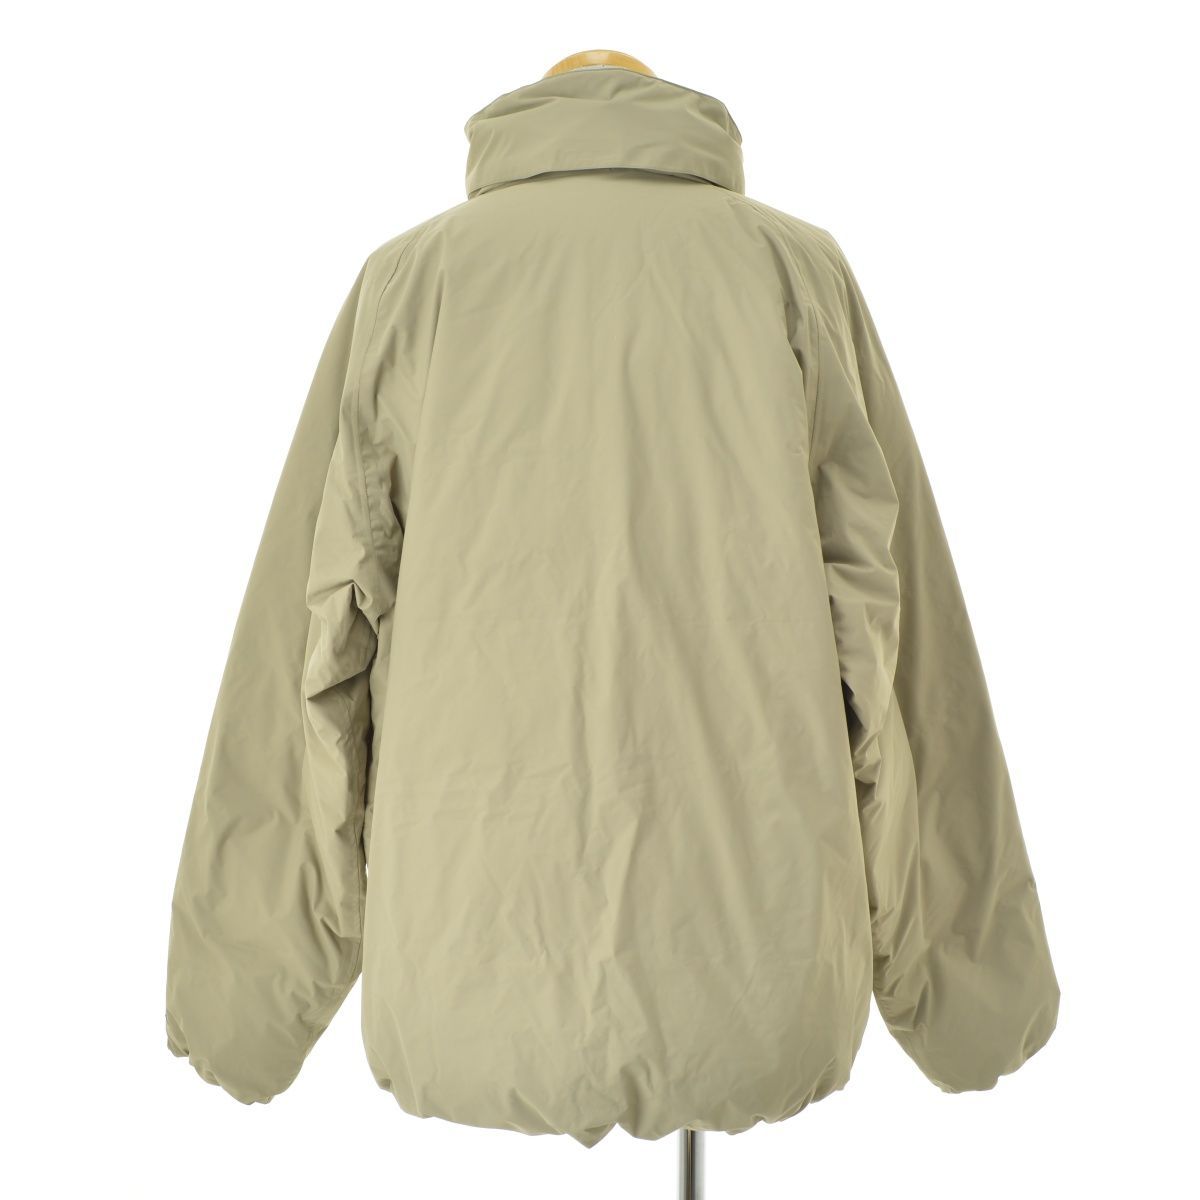 L【COLUMBIA】PM4446 Cove to Stream Down Jacket コーブトゥー 